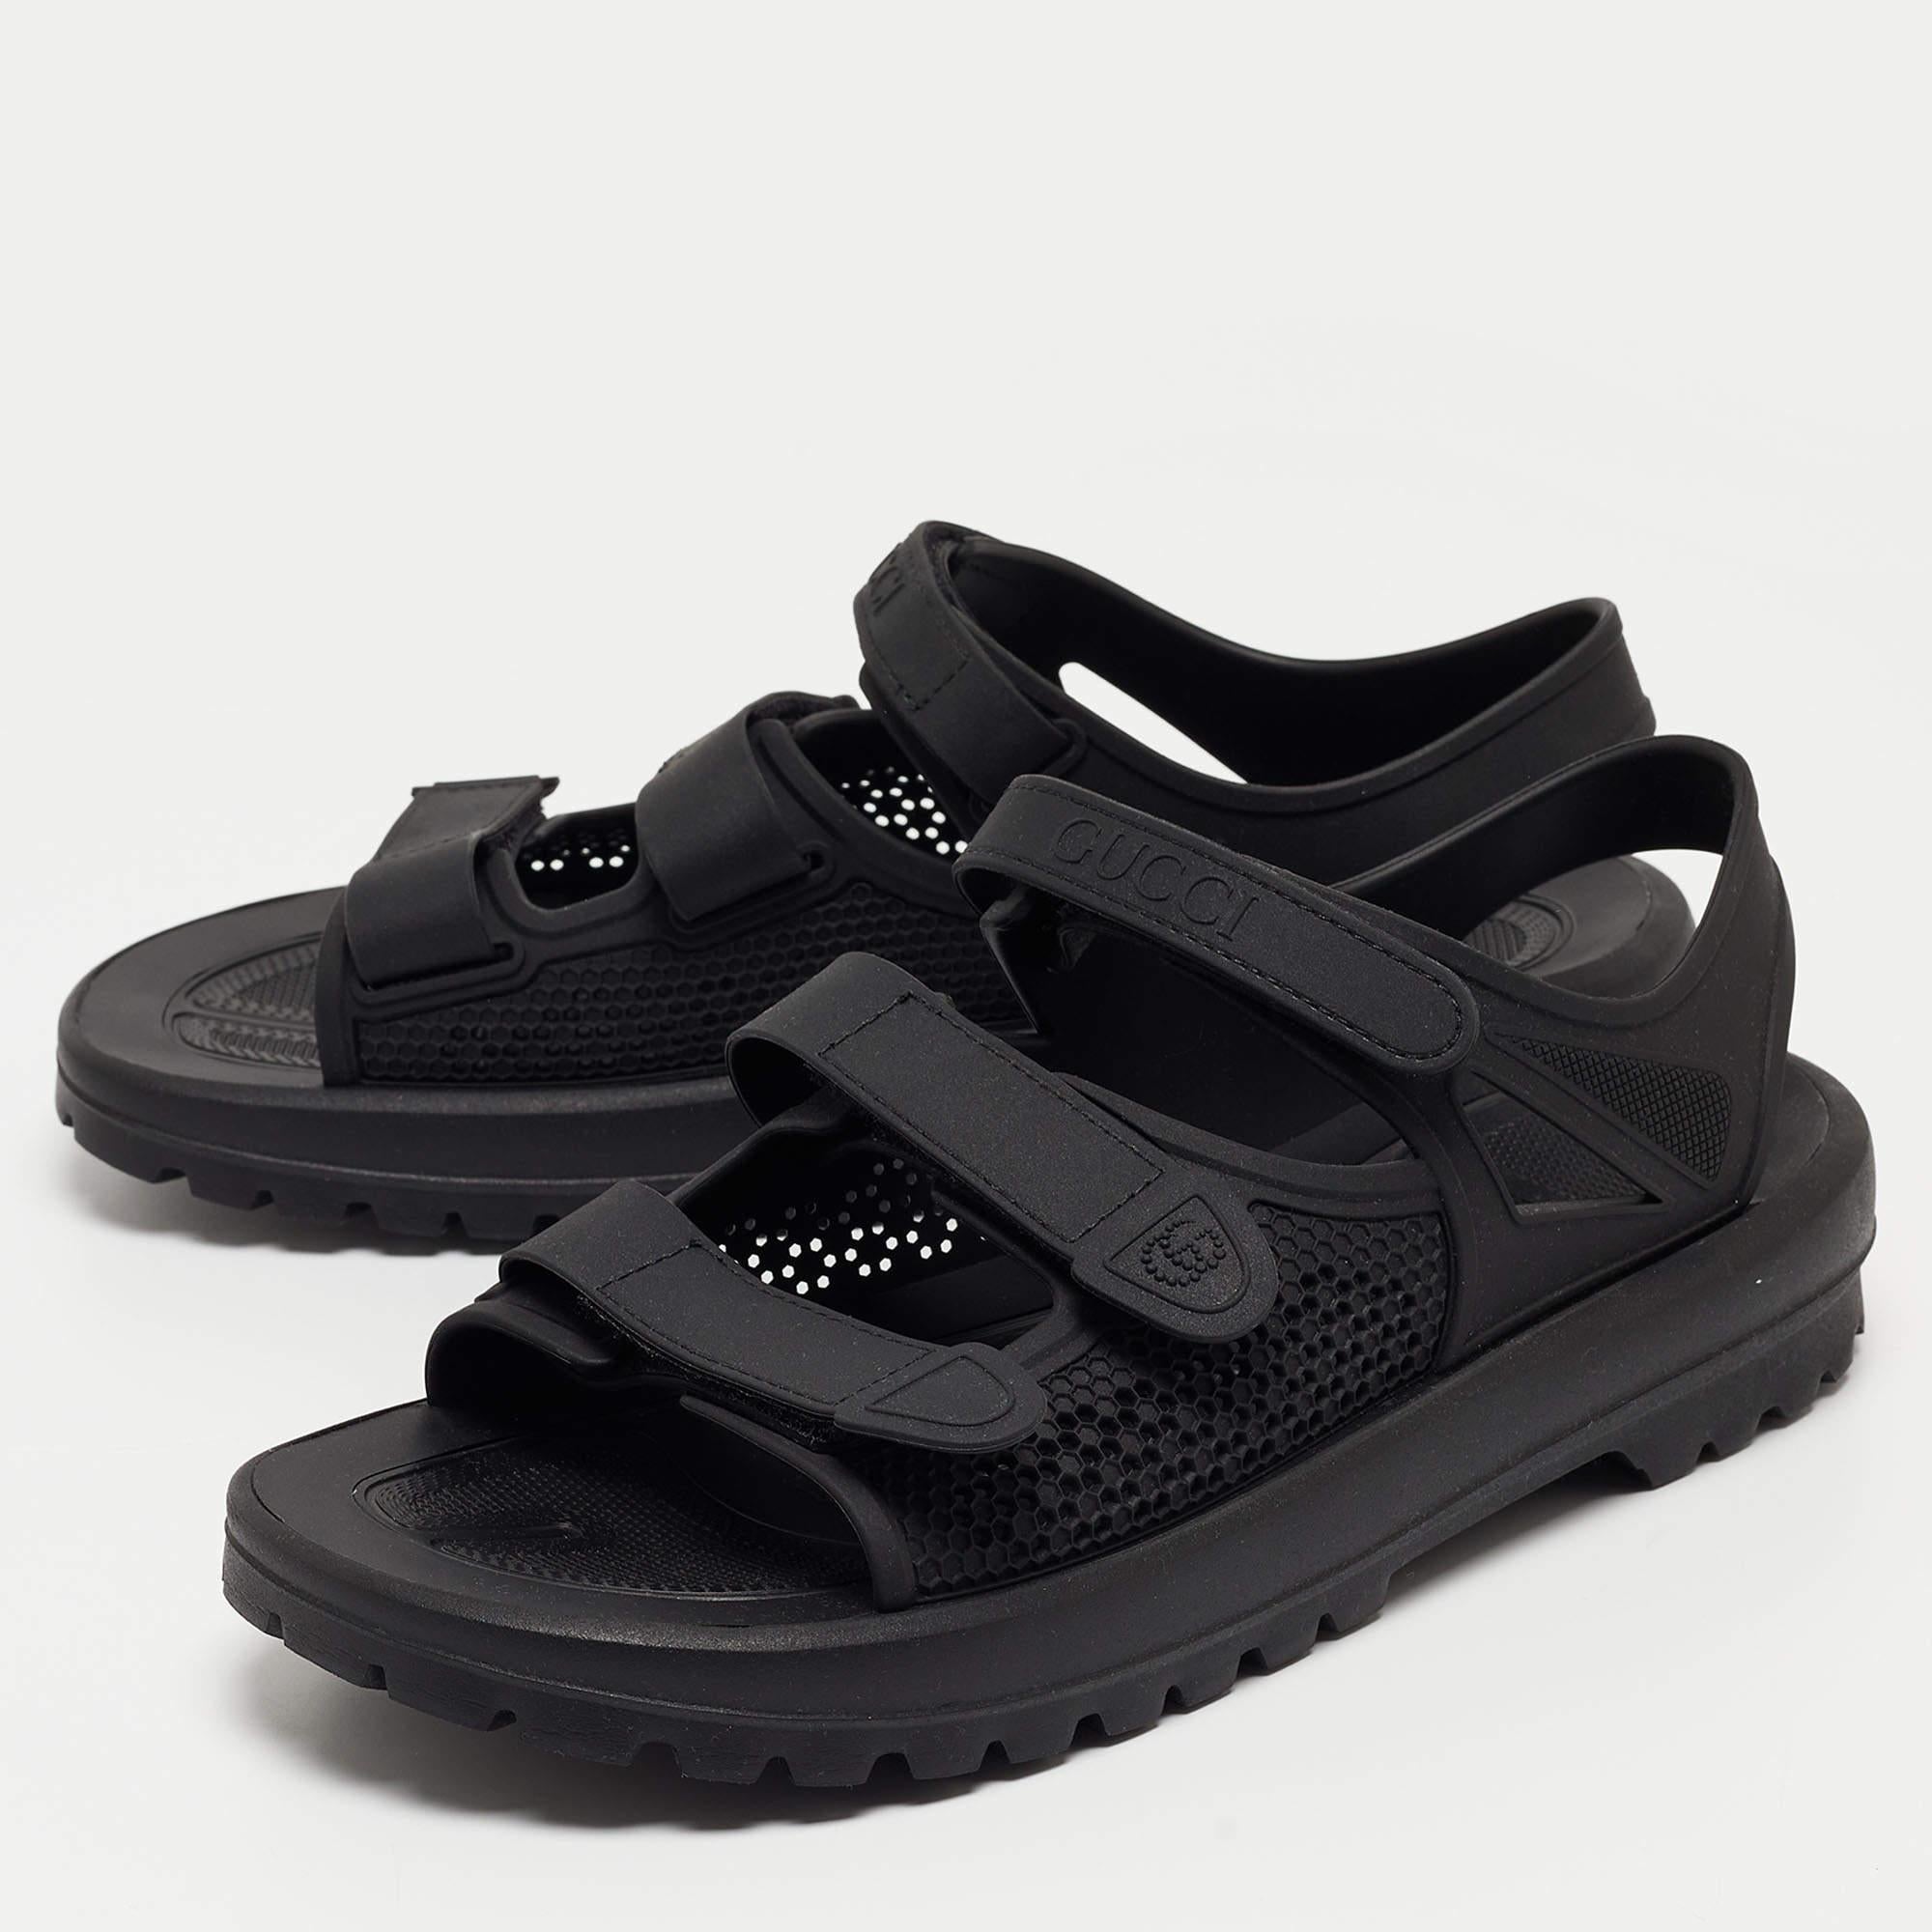 Gucci Black Honeycomb Rubber Flat Sandals Size 44 For Sale 2